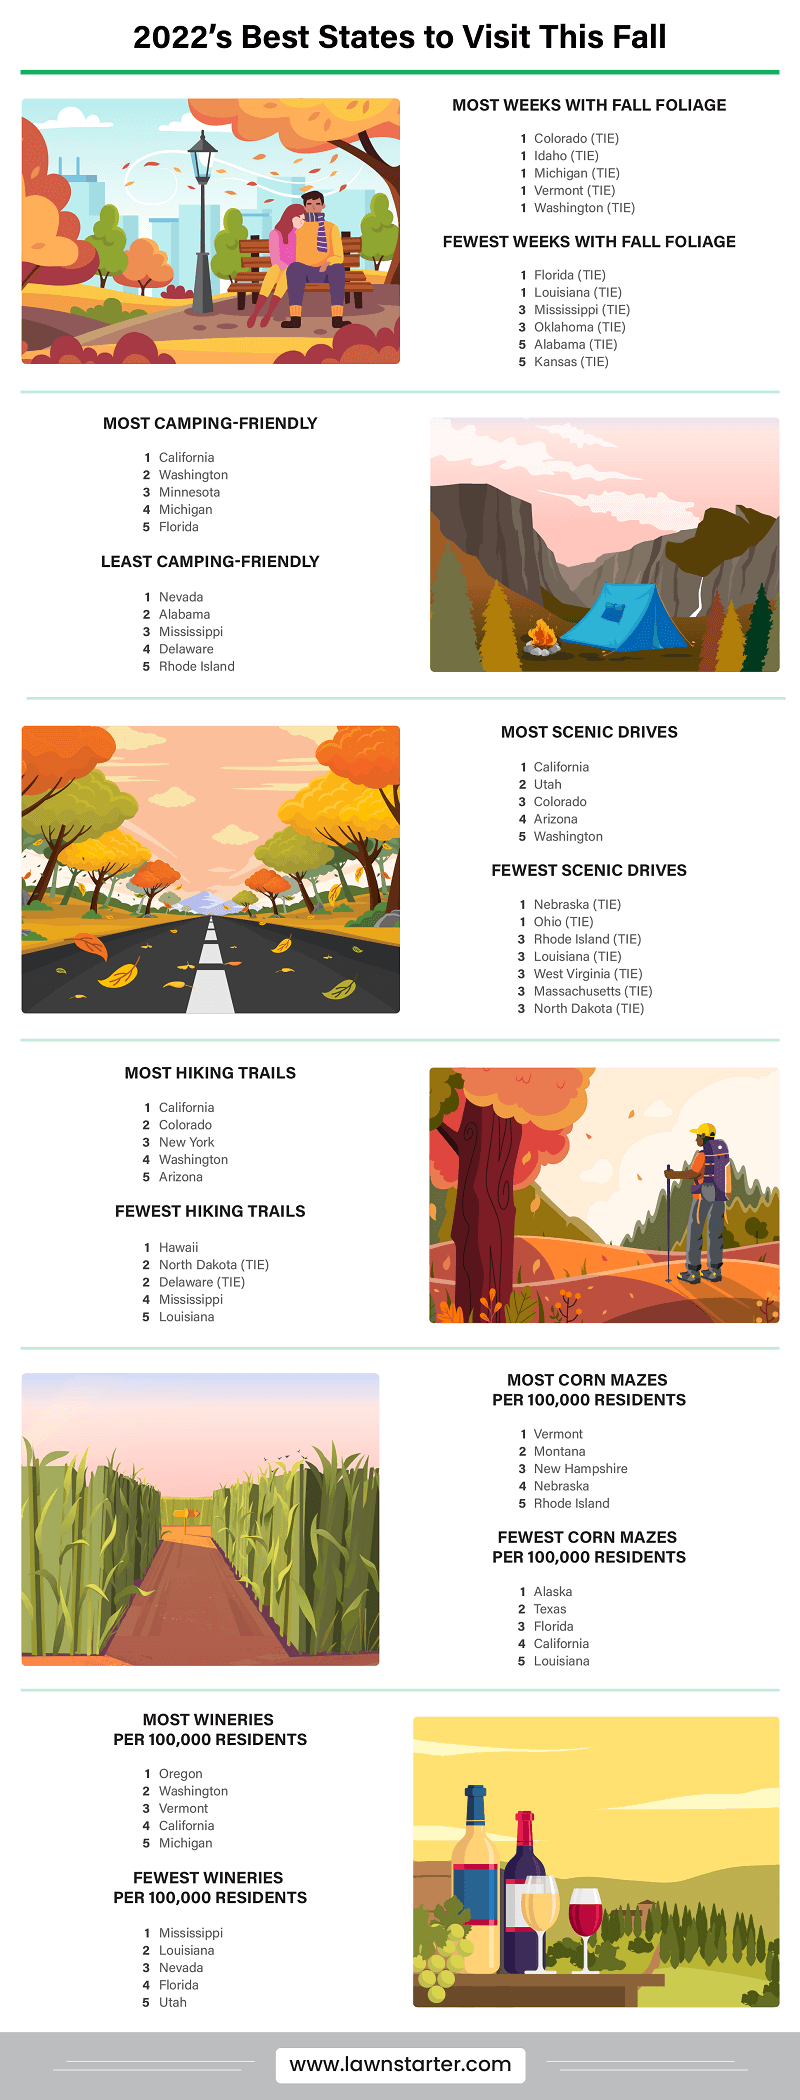 Infographic showing the Best States to Visit This Fall, a ranking based on fall scenery, outdoor recreation, fall entertainment, and safety